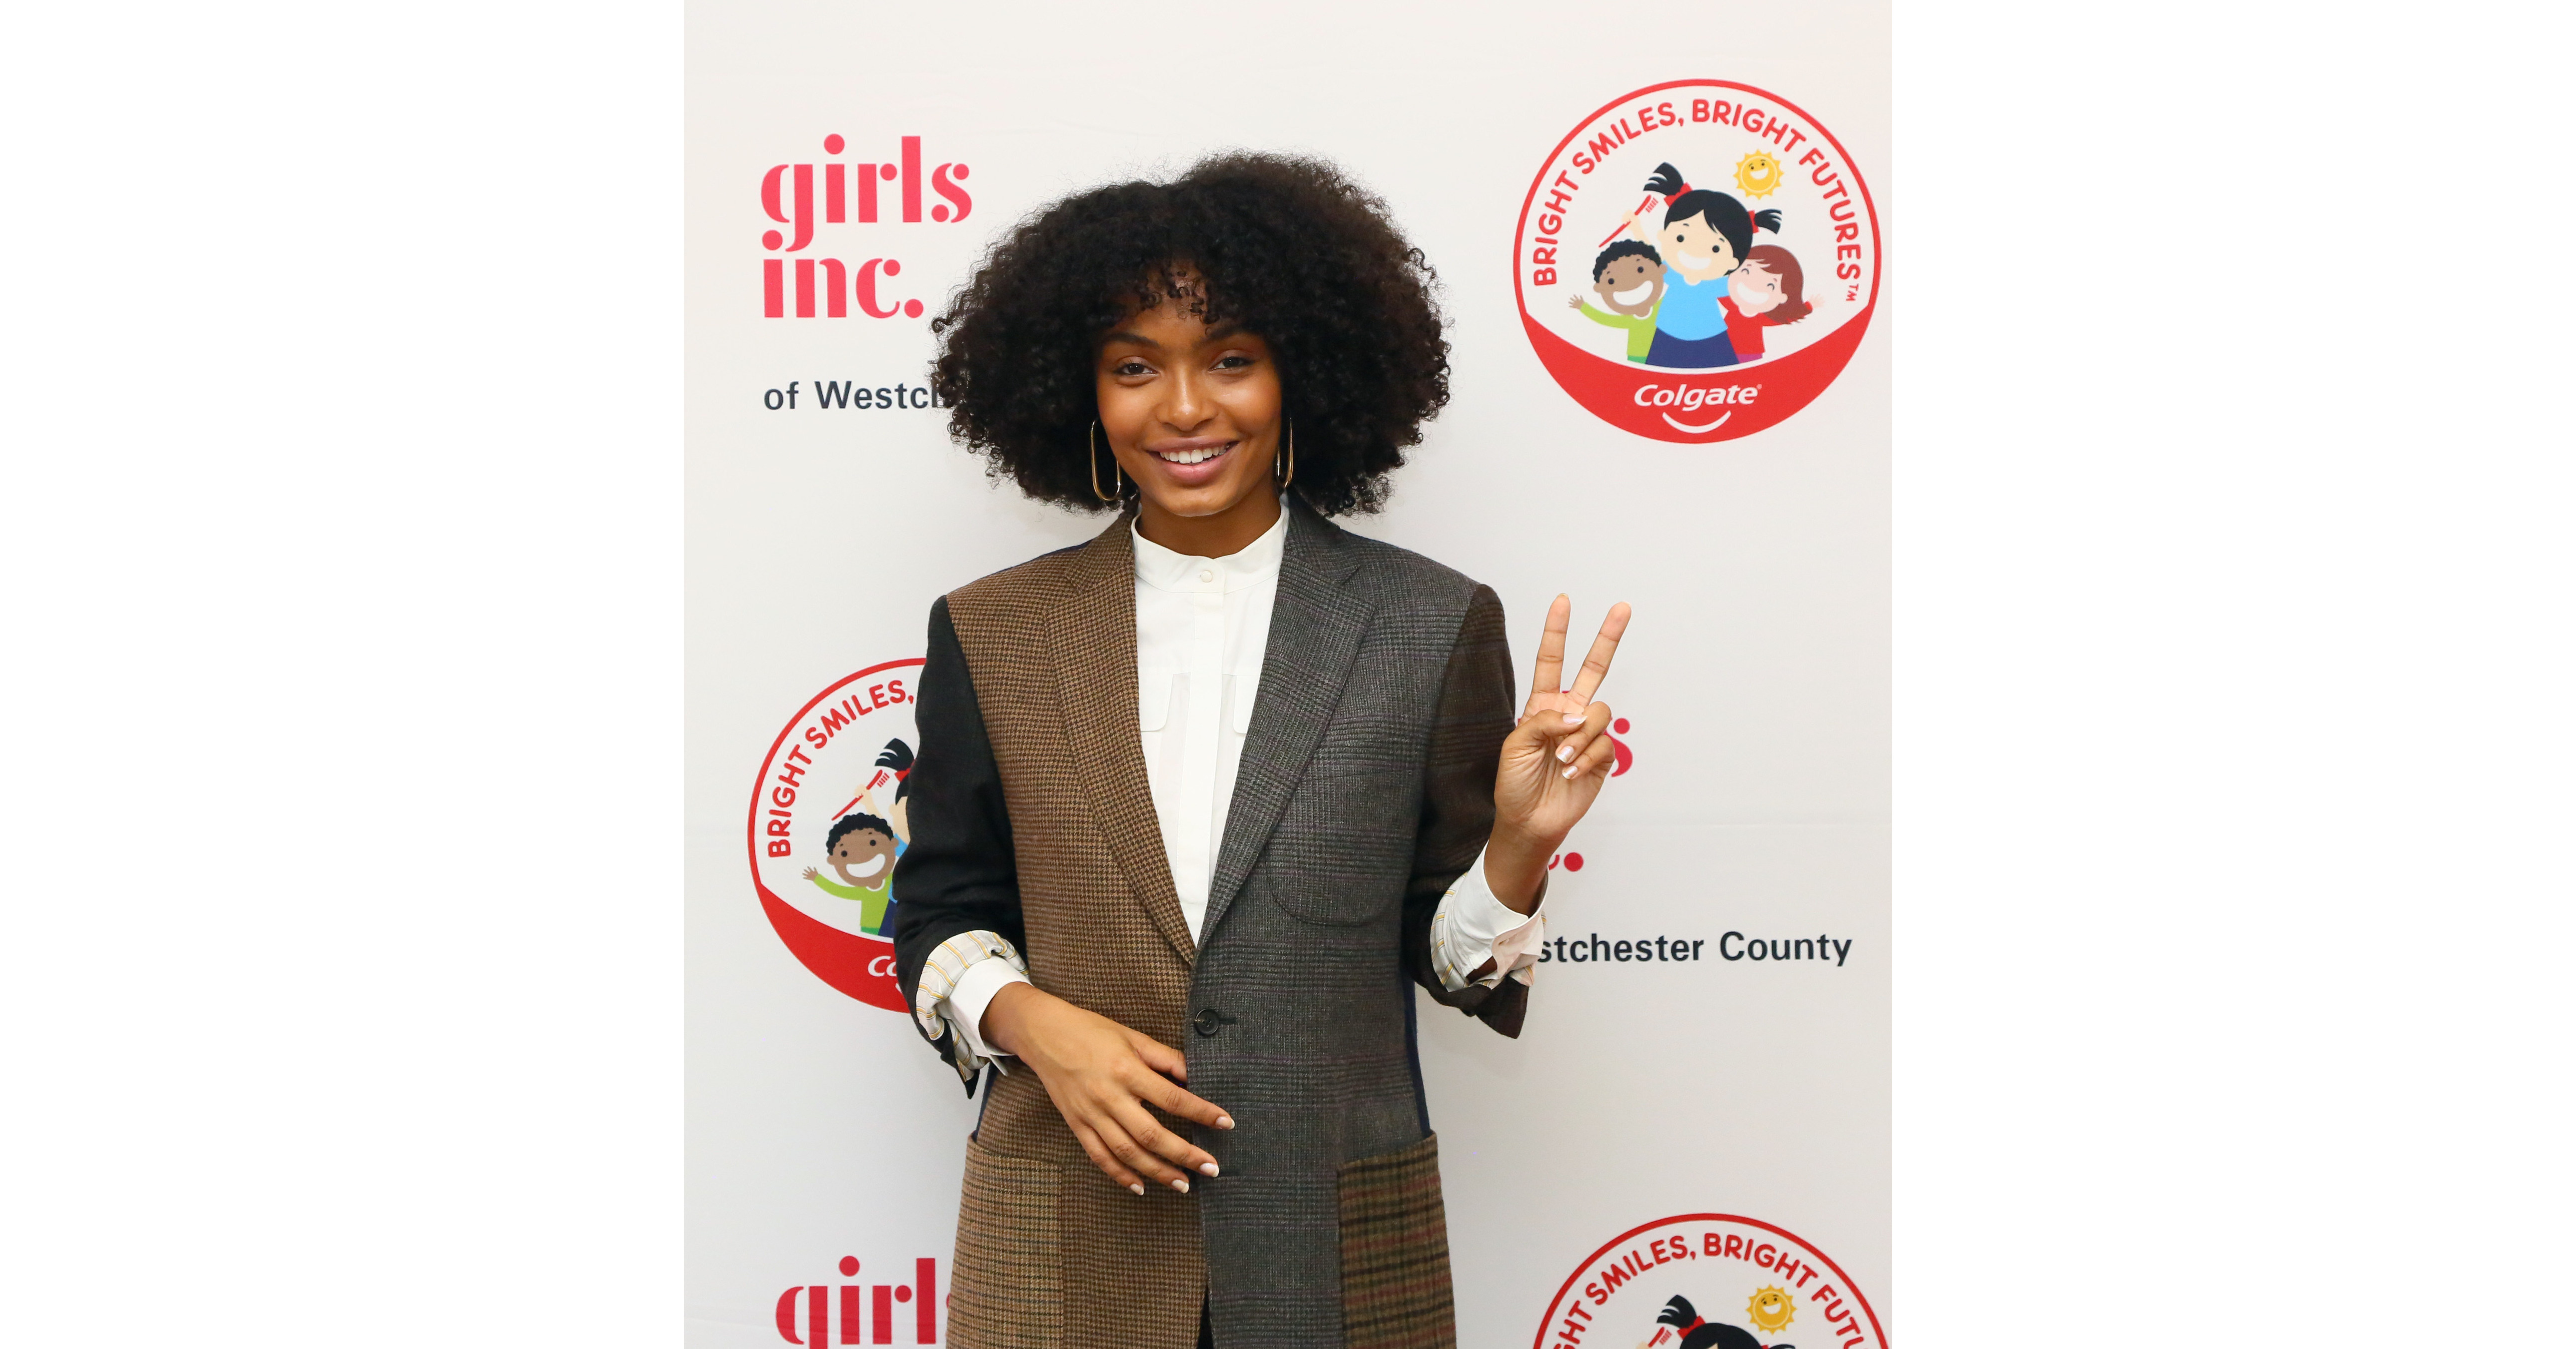 Inspiration & Impact: Girls Inc. of Westchester County & Actress Yara Shahidi Honor the Strong, Smart and Bold